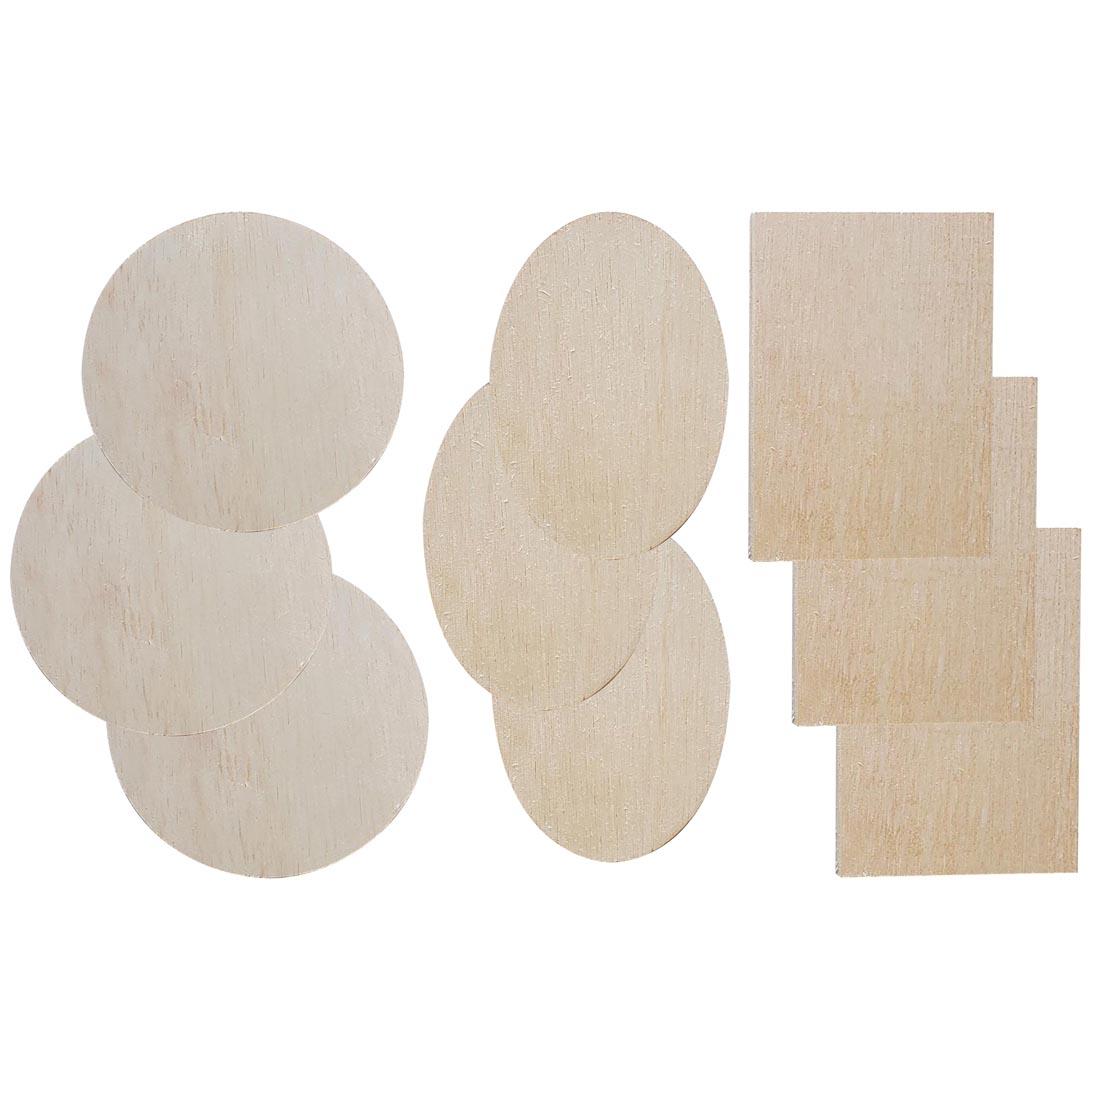 Mini Thin Plaque Assortment by Walnut Hollow, in 3 different shapes